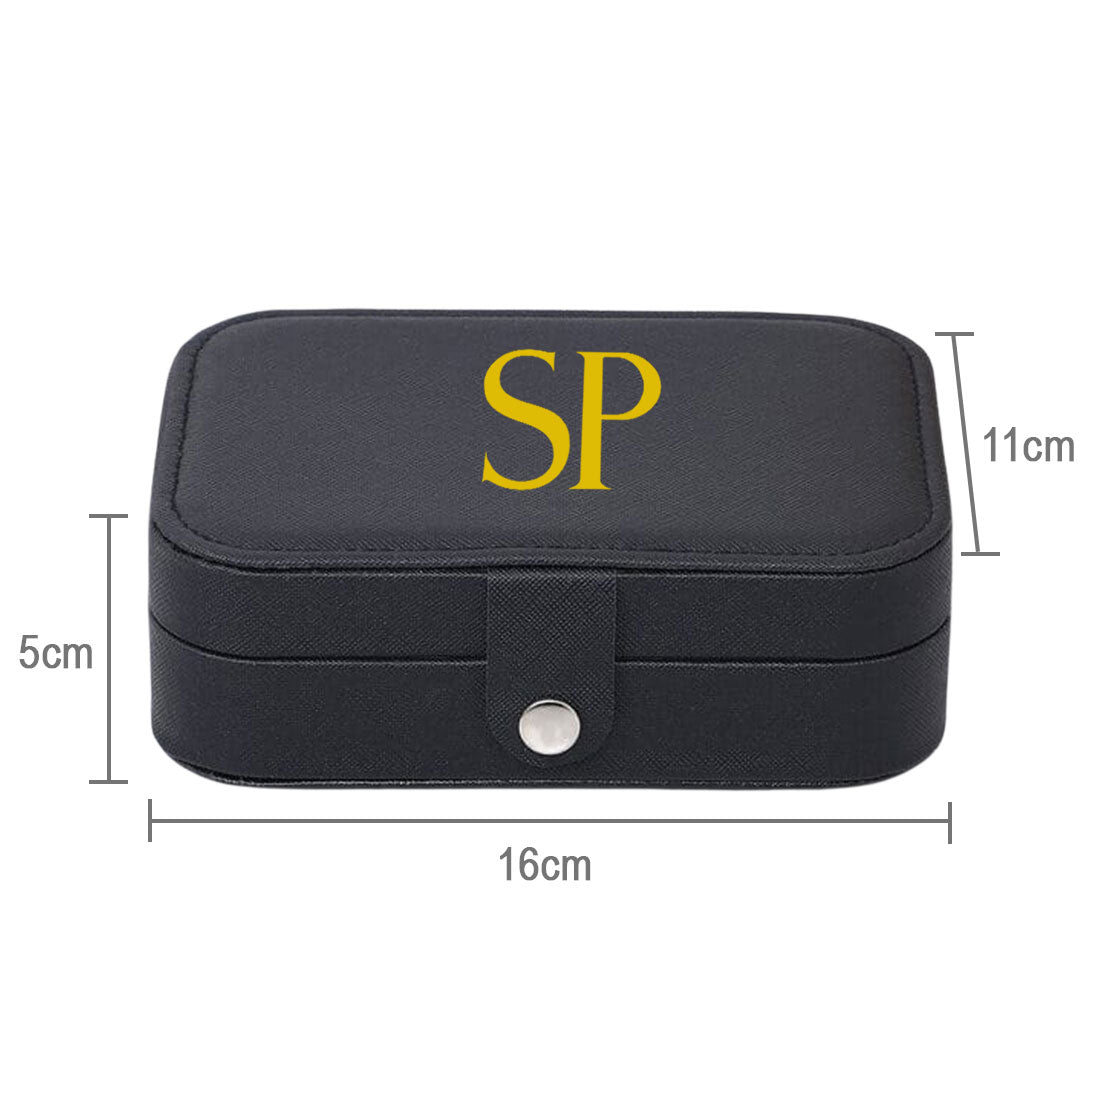 Customized Jewellery Box Girls Travel Storage Case for Rings Earrings and Pendants